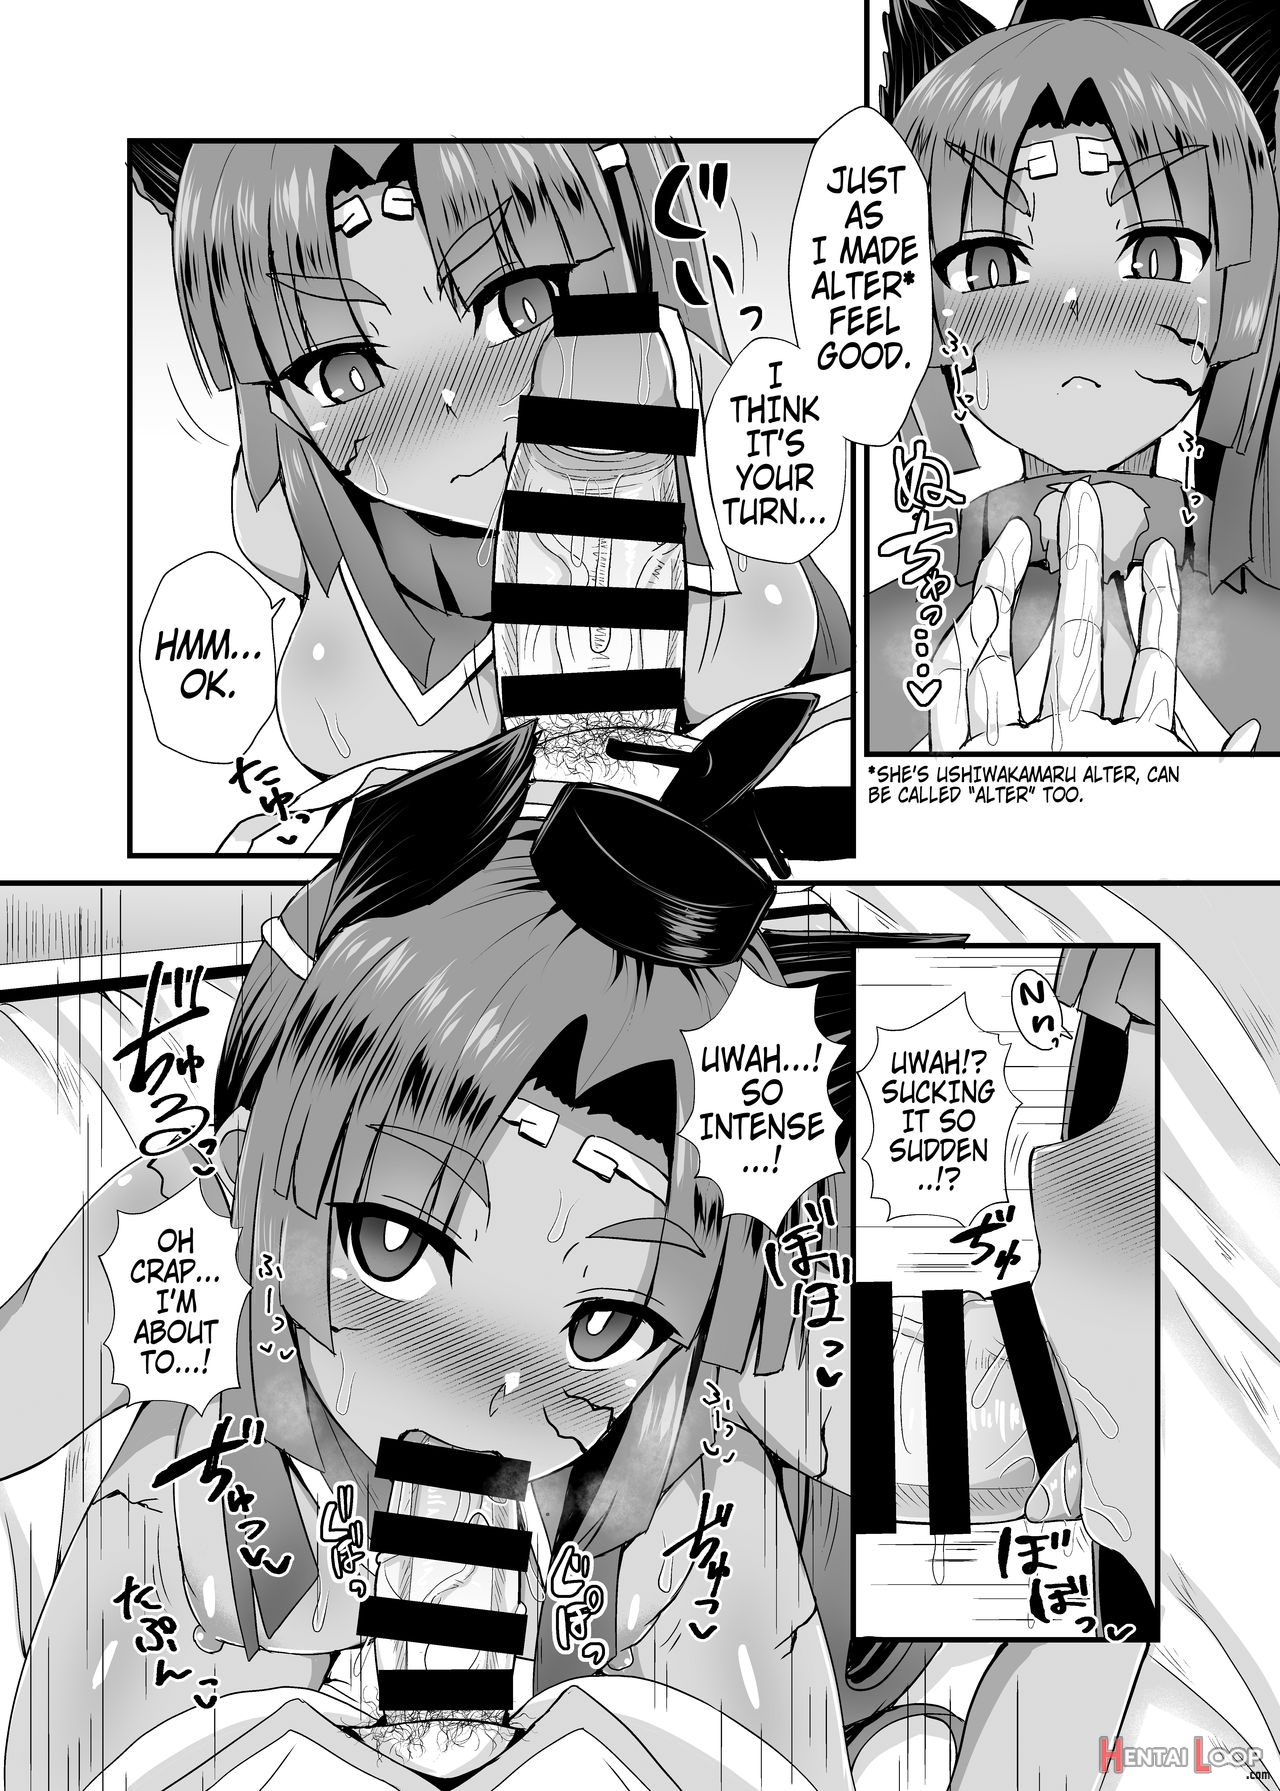 Doing What I Want With An Hypnotized Ushiwakamaru Alter page 9